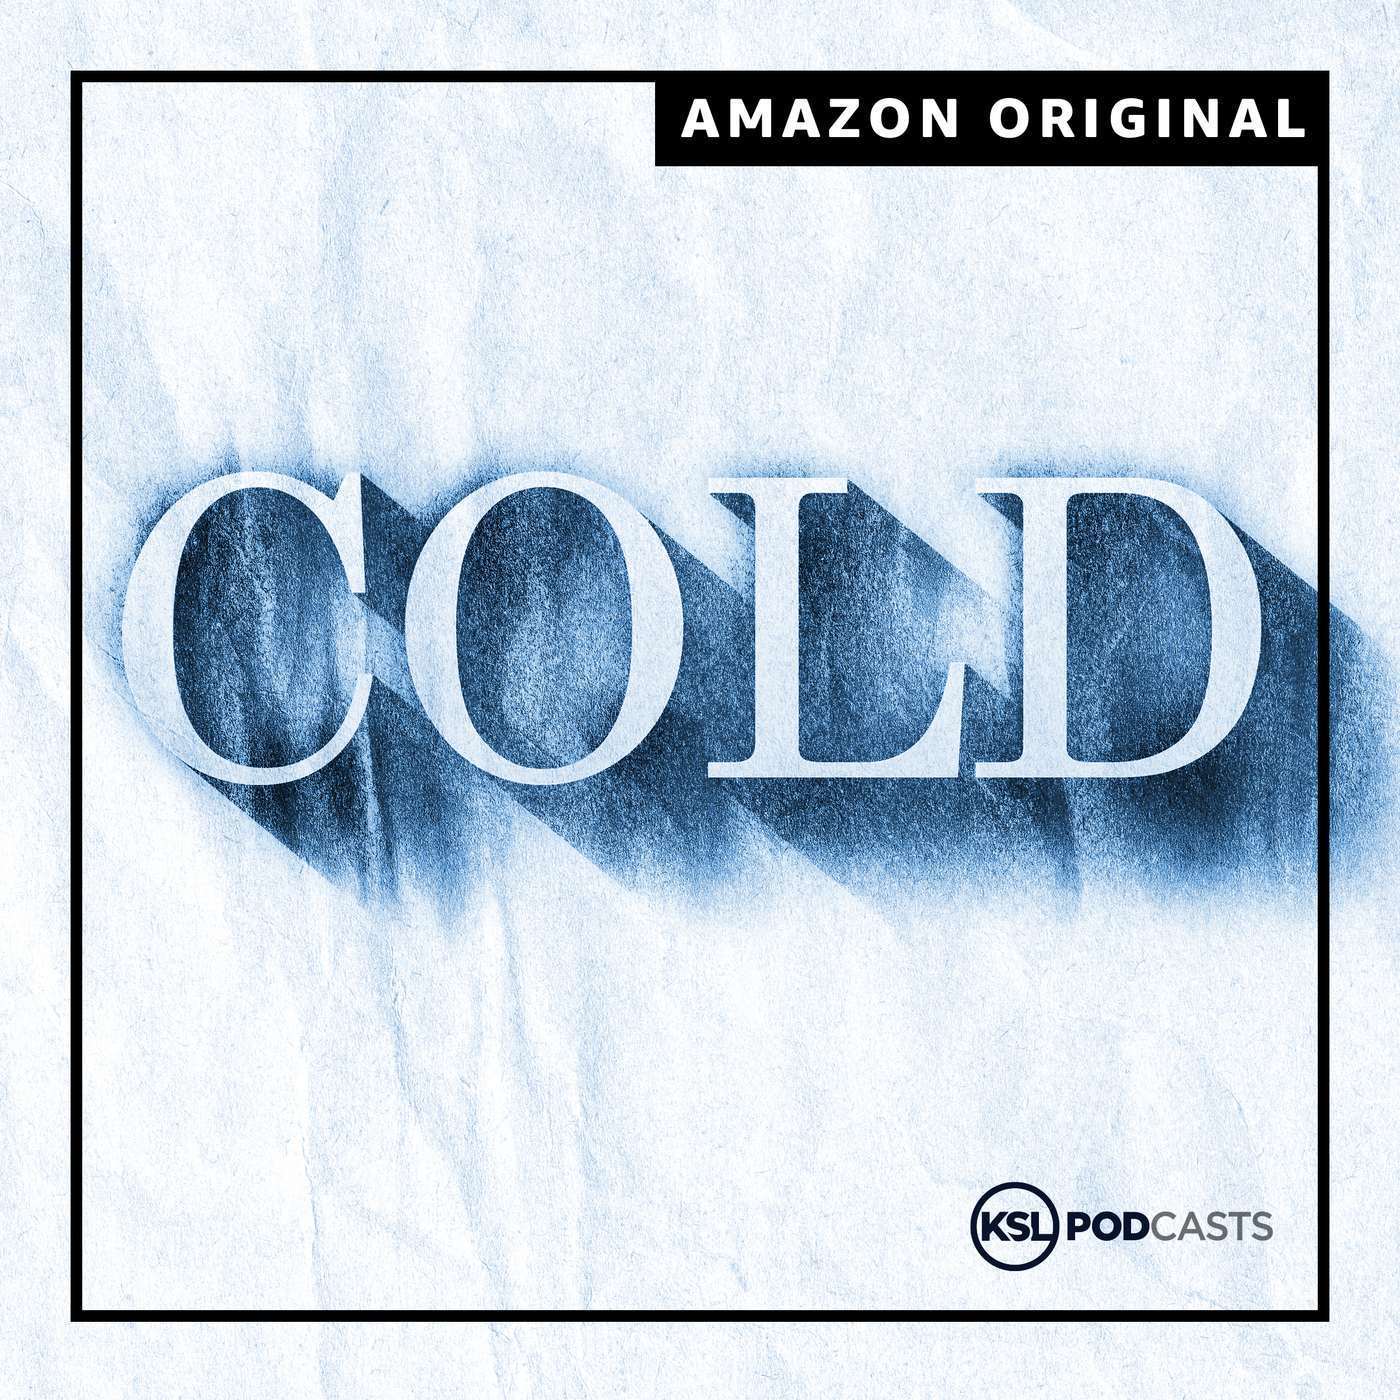 Cold by KSL Podcasts | Amazon